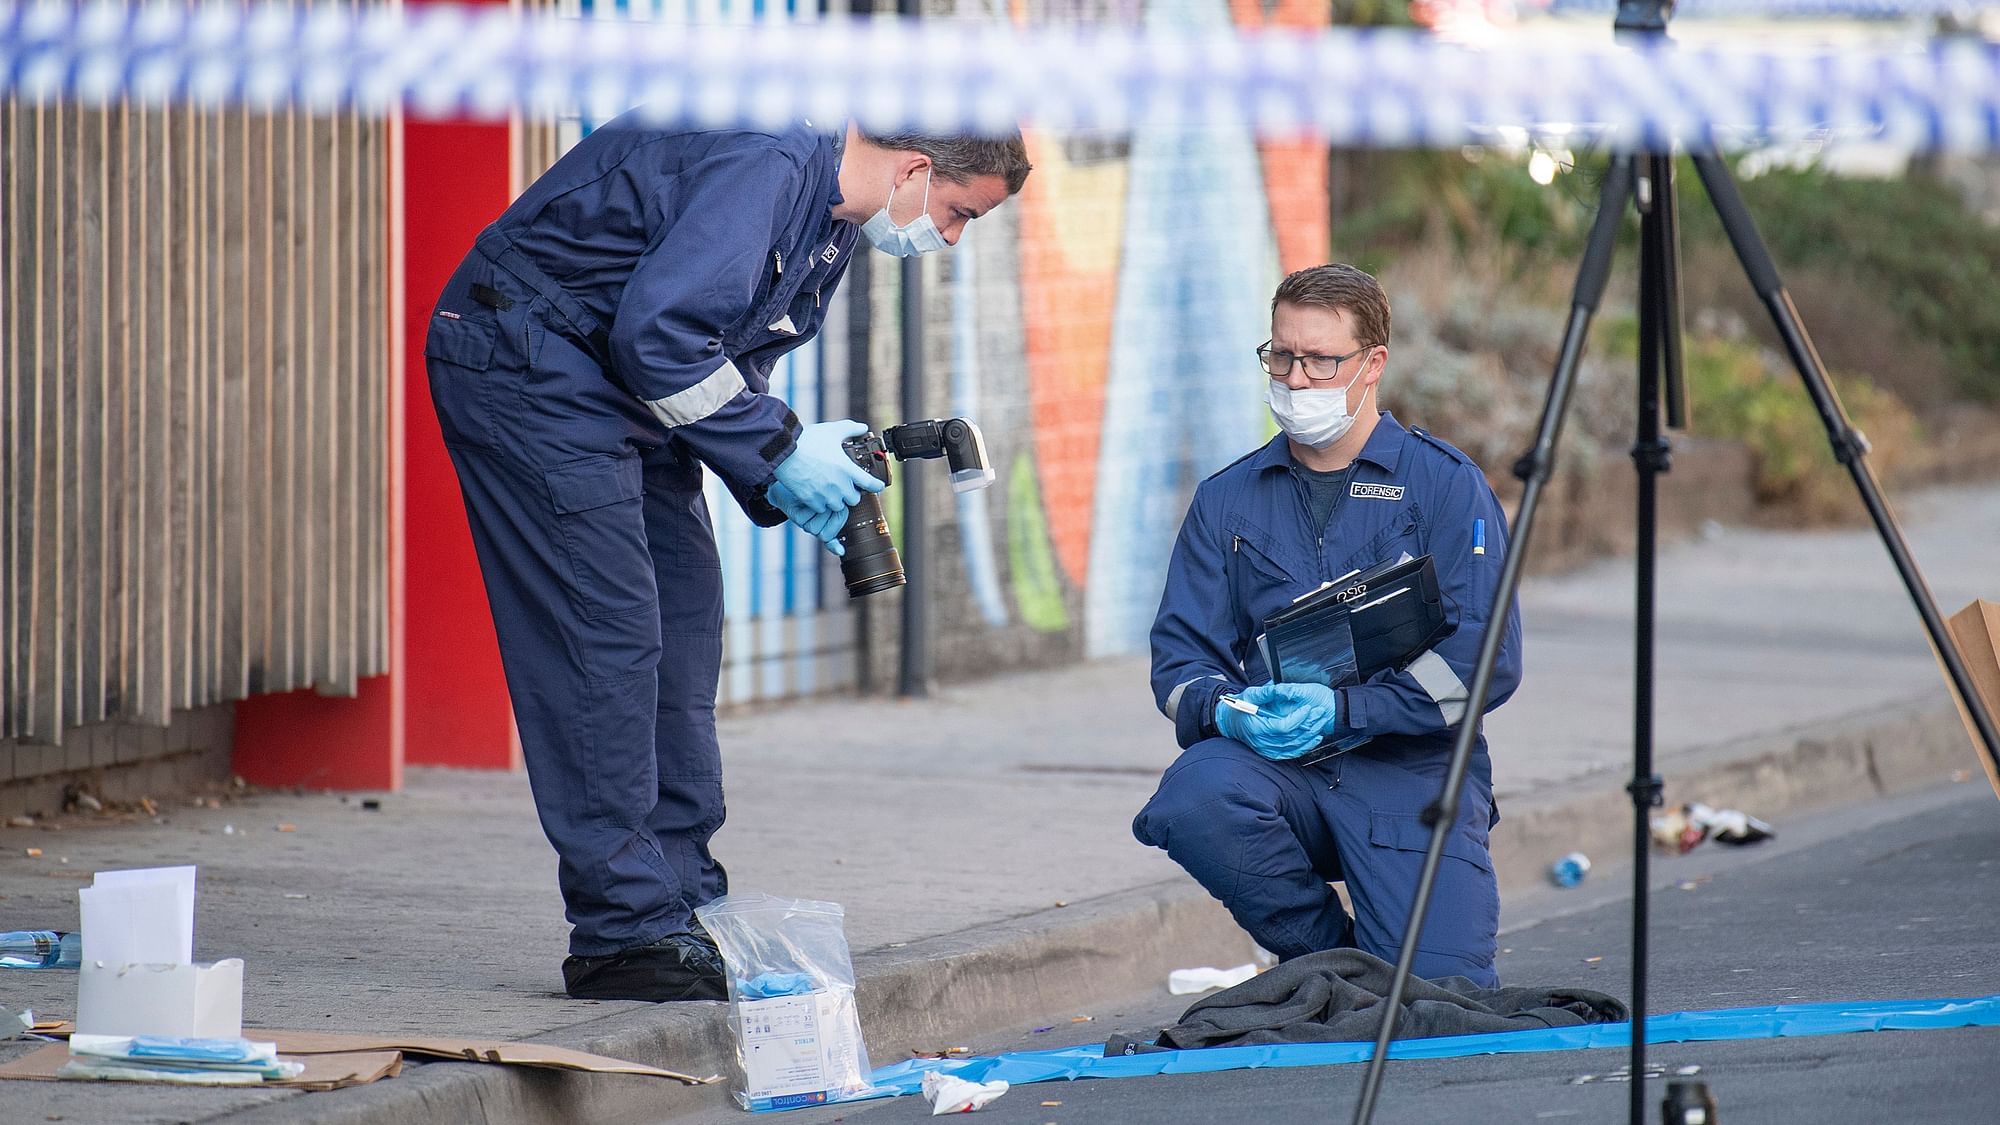 Forensic police examine items at the scene of a multiple shooting outside Love Machine nightclub in Melbourne, Sunday, 14 April, 2019.